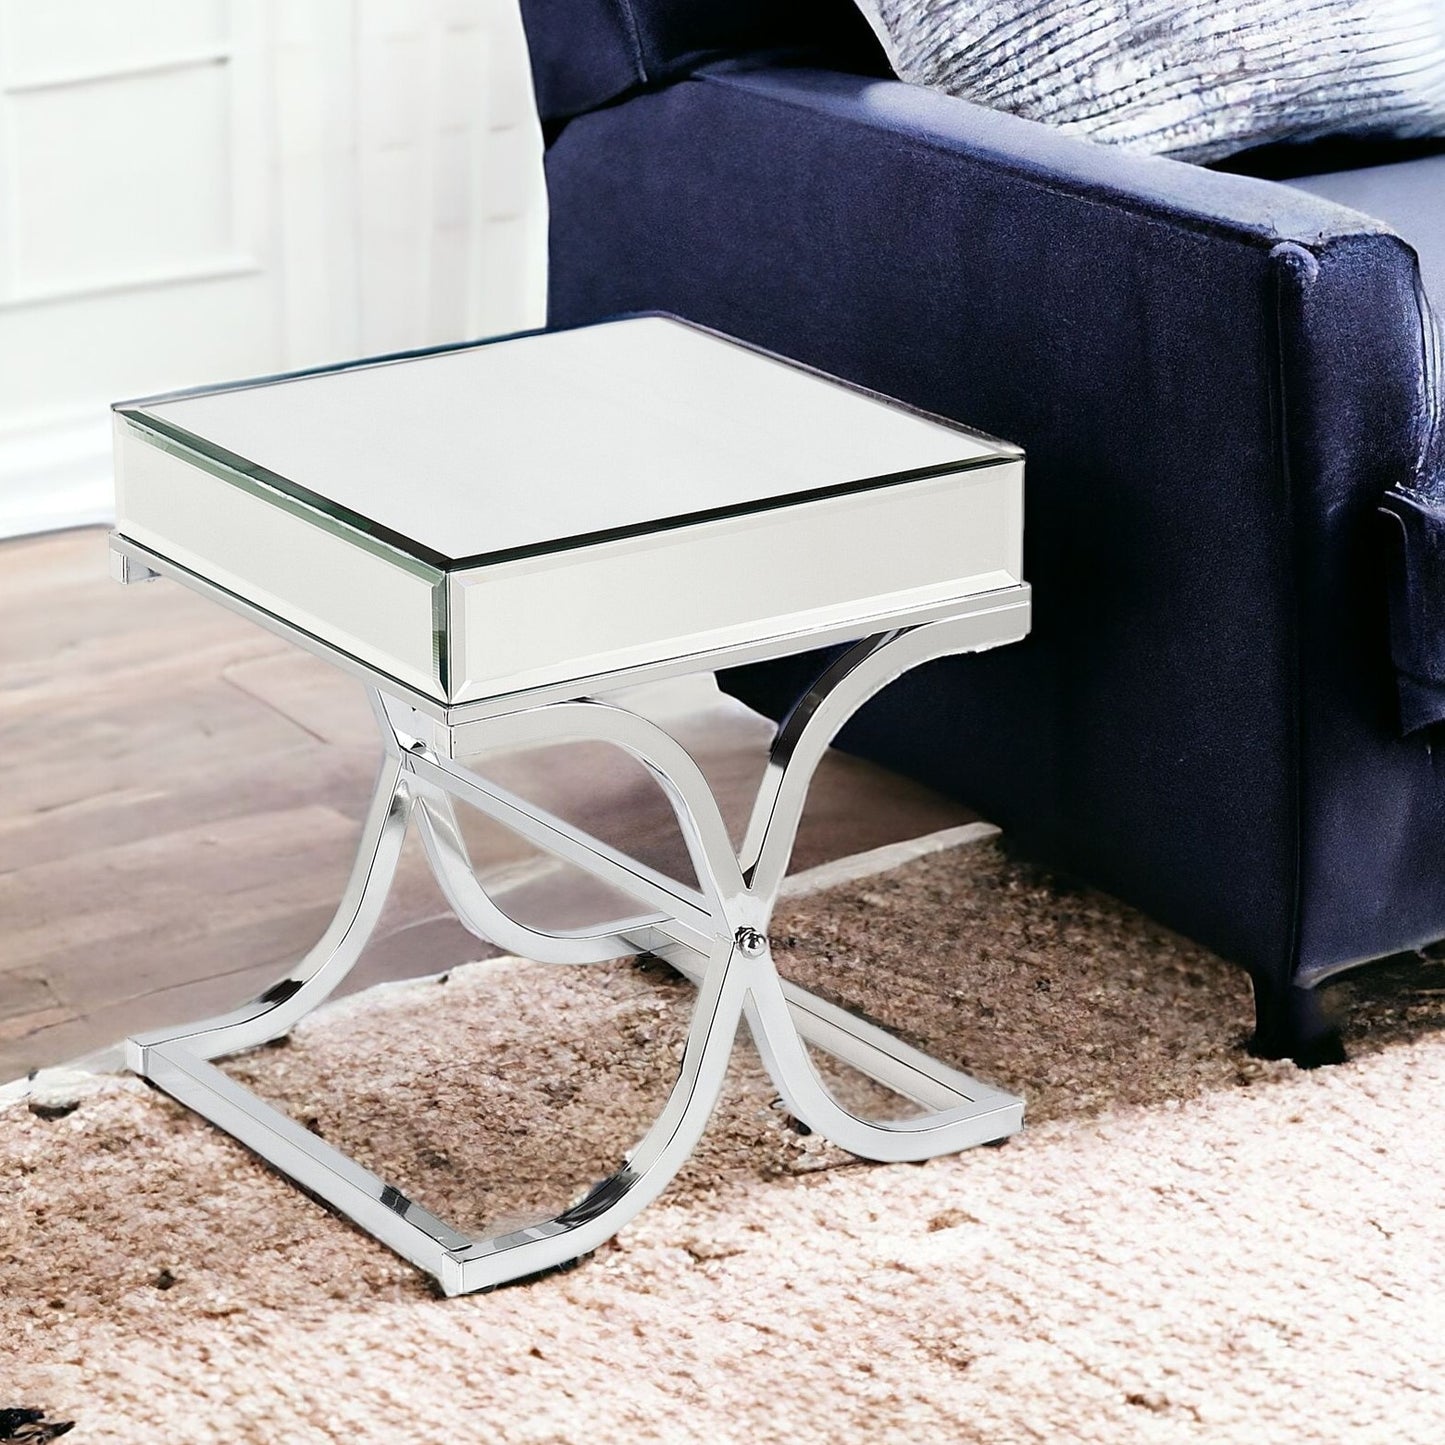 22" Silver And Clear Mirrored Glass Square End Table